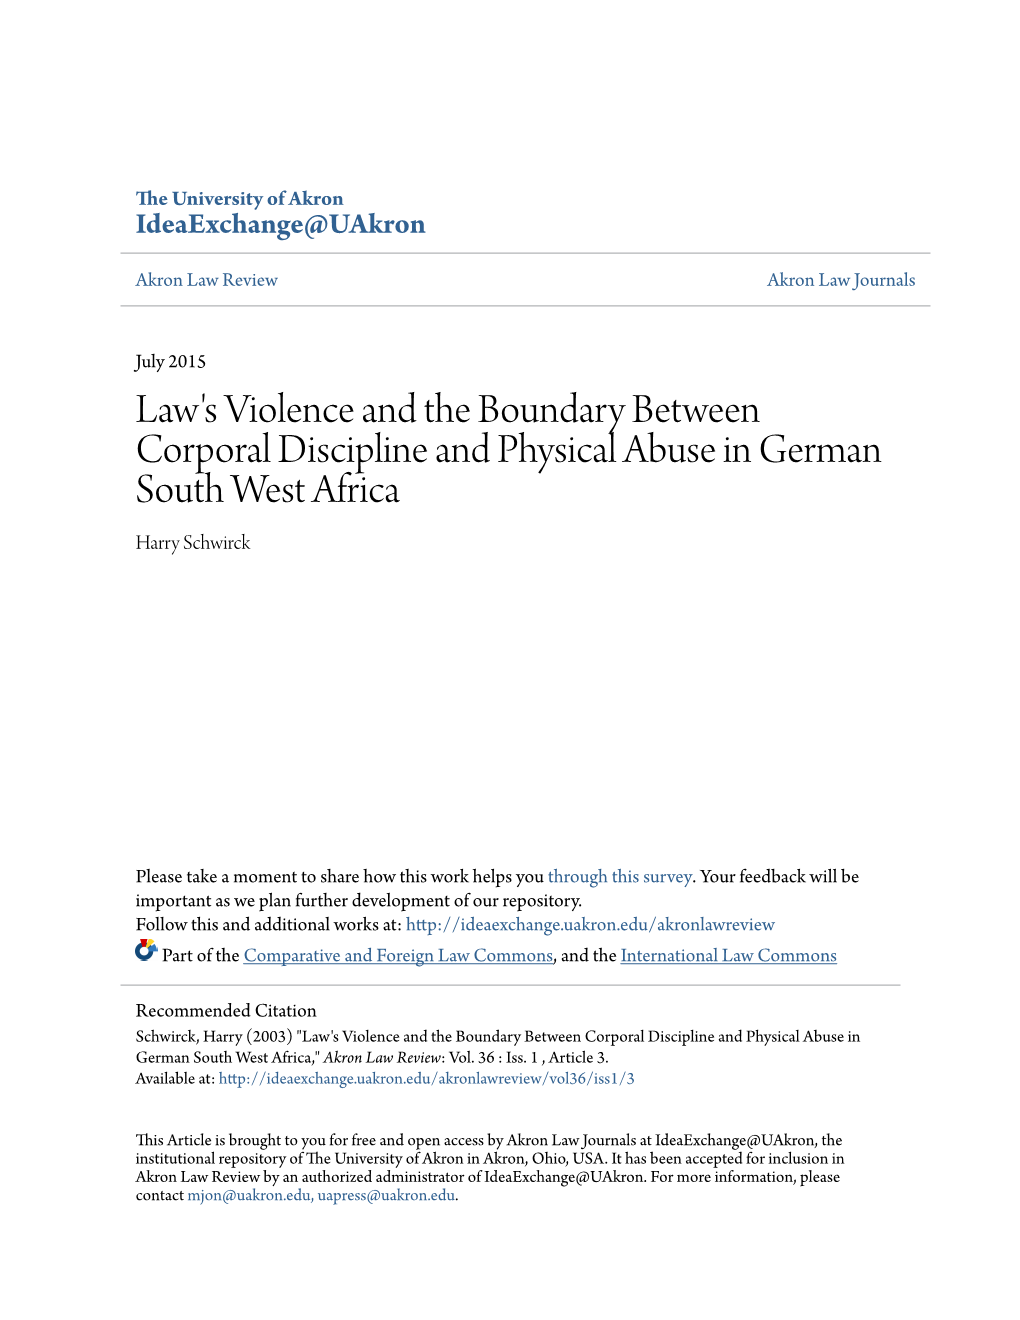 Law's Violence and the Boundary Between Corporal Discipline and Physical Abuse in German South West Africa Harry Schwirck